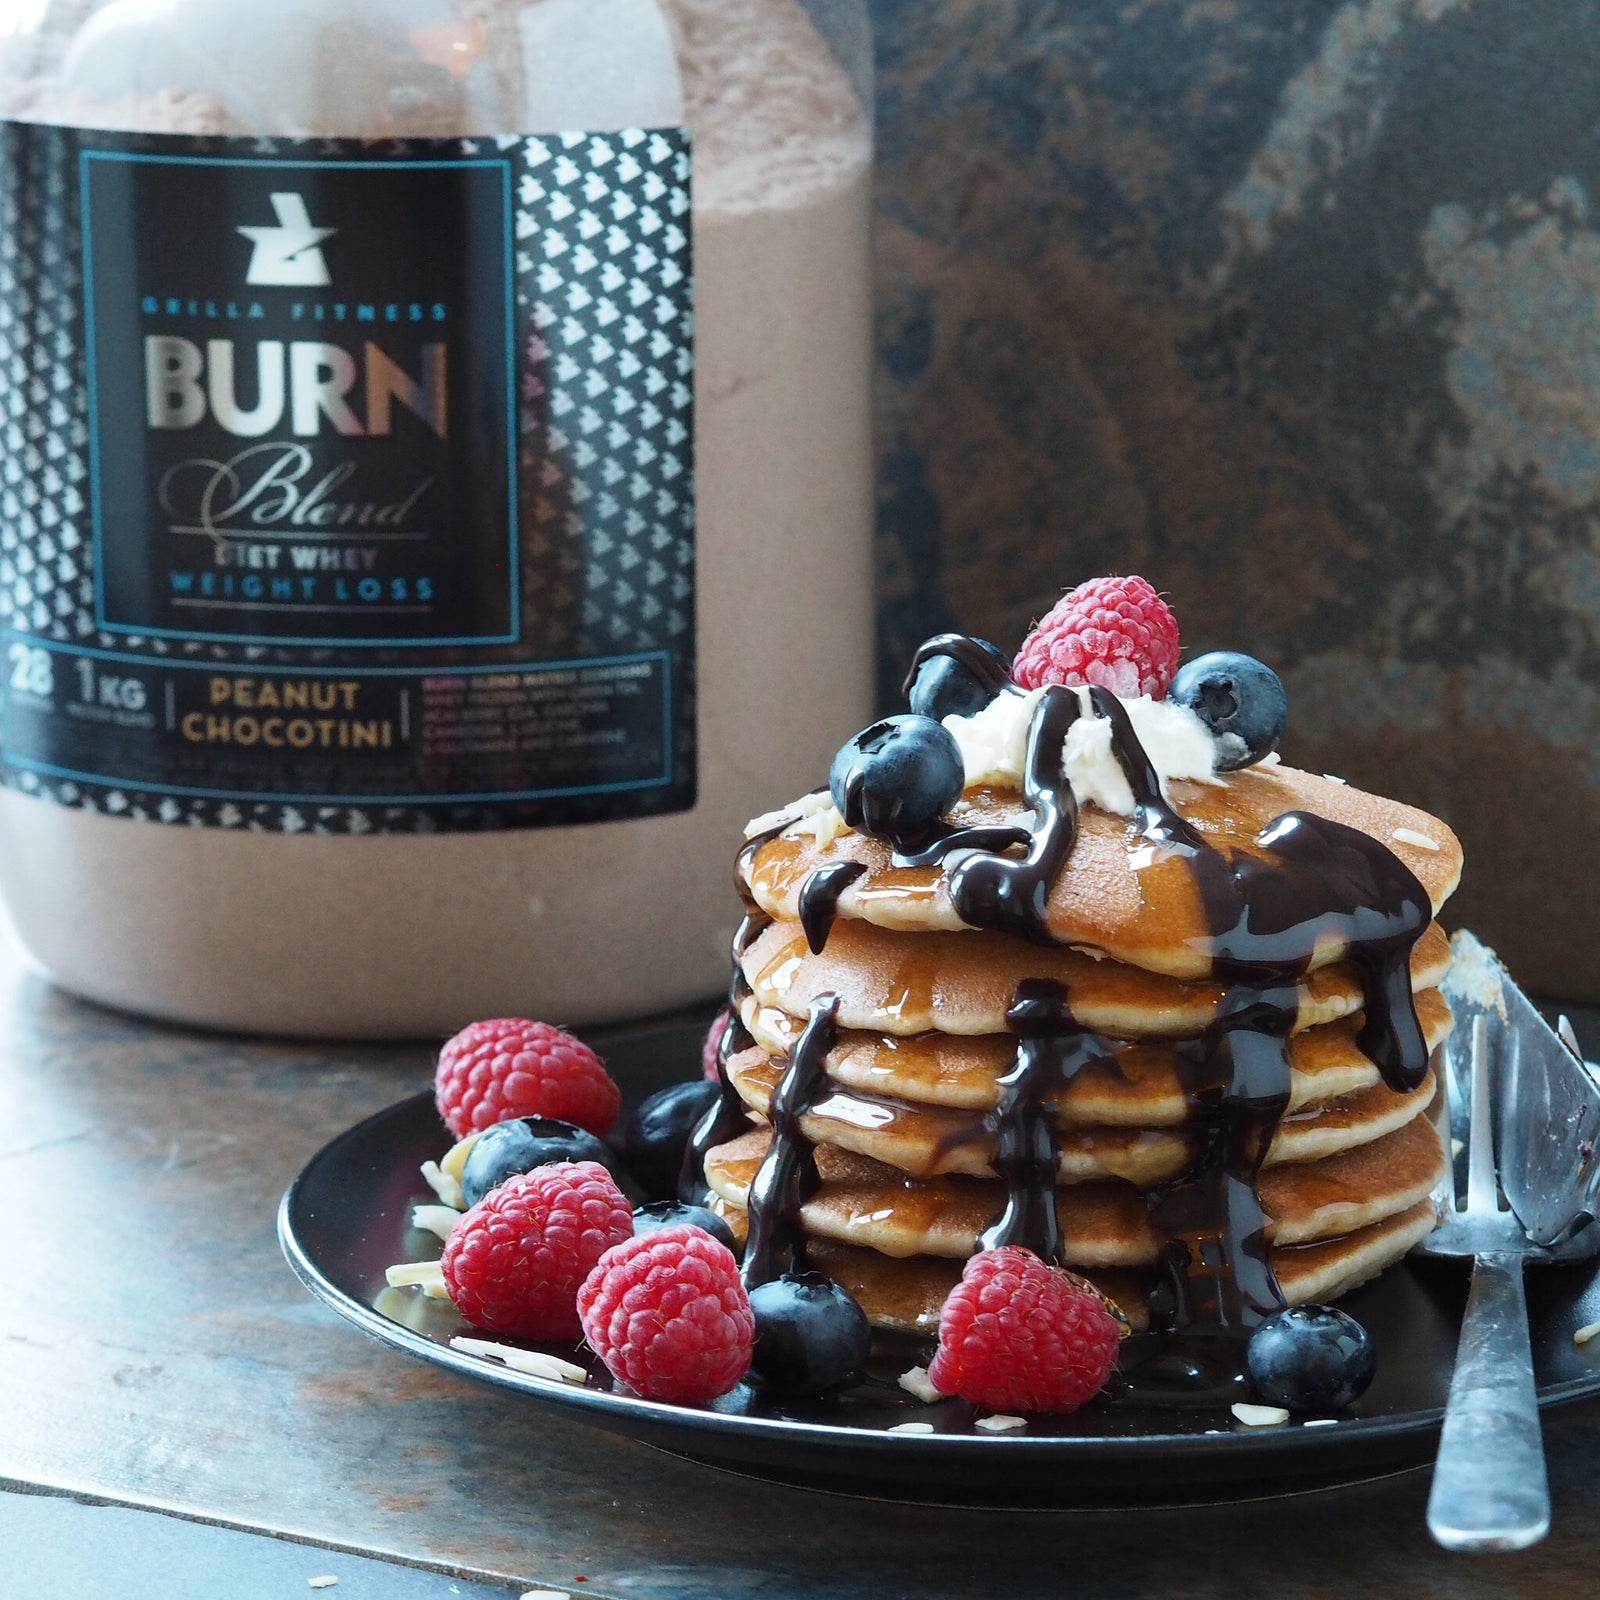 Anyone for Protein pancakes?